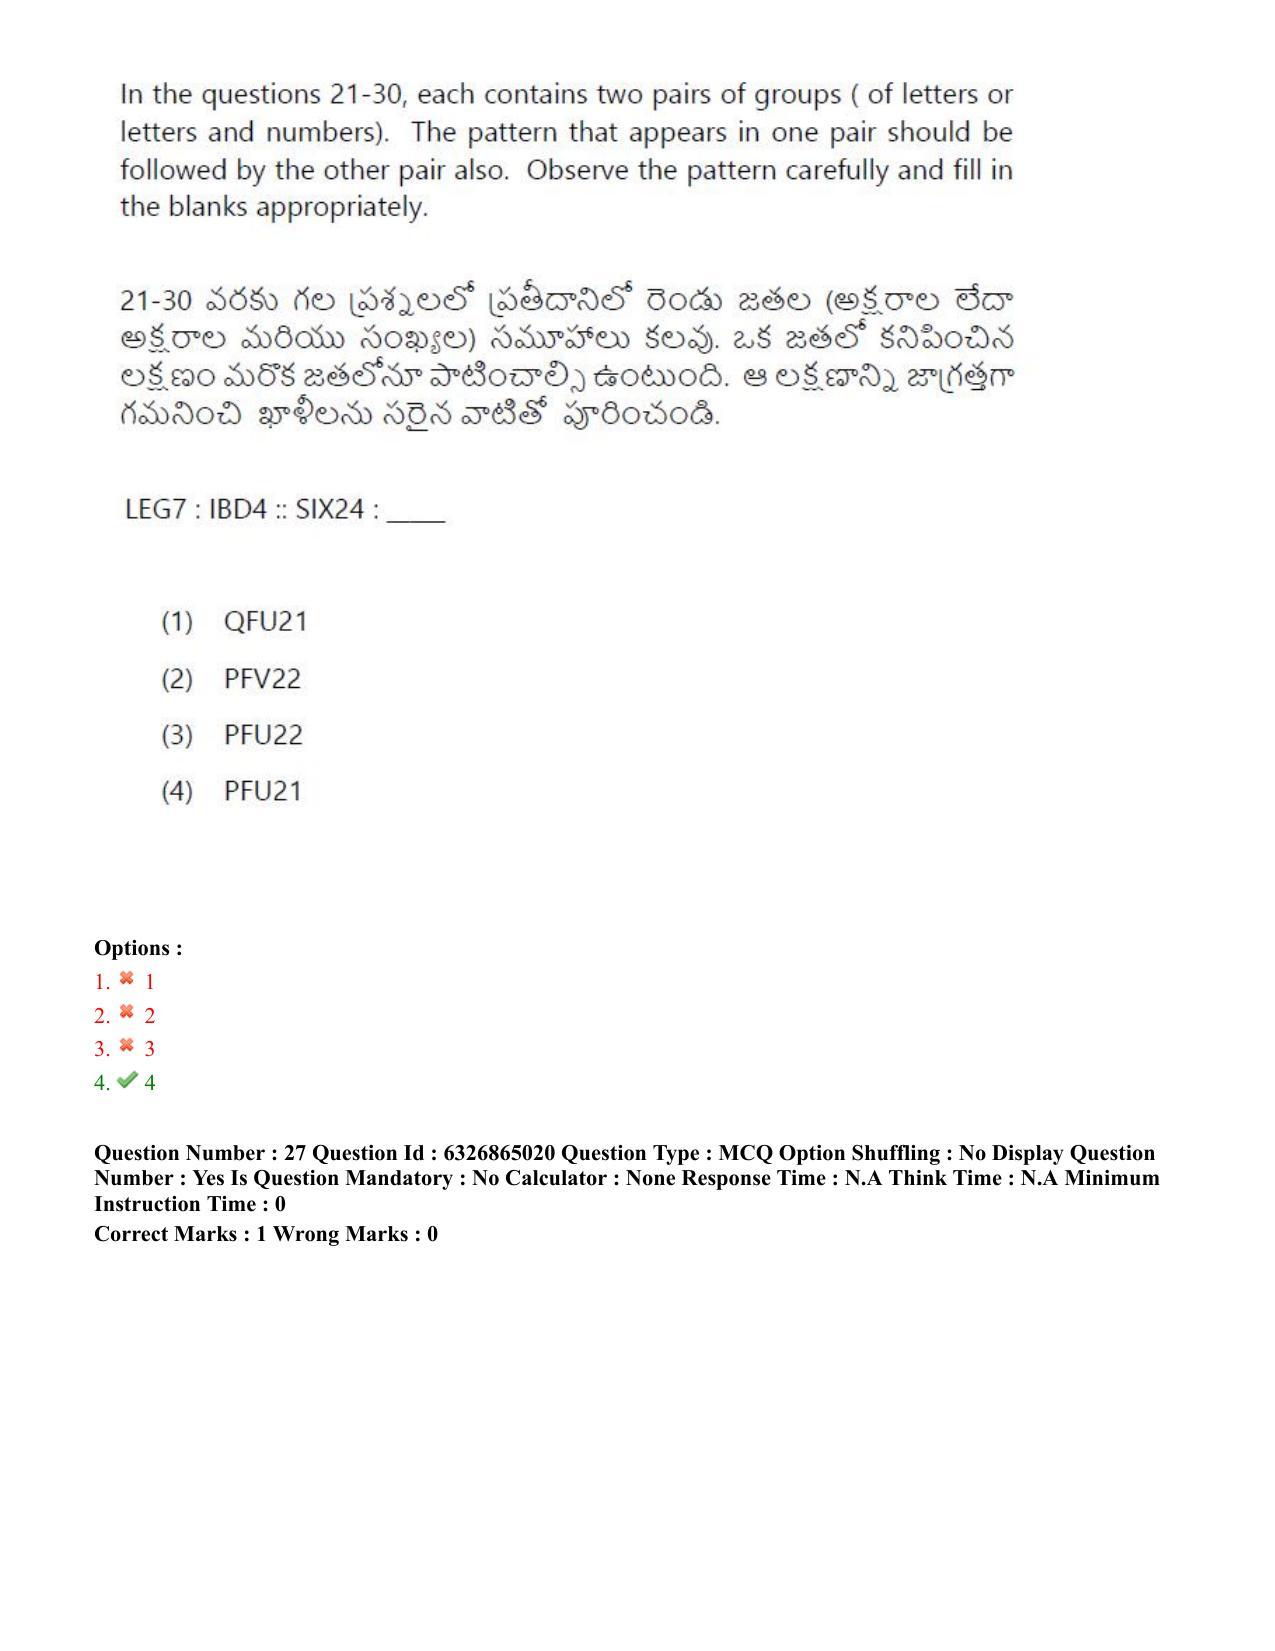 TS ICET 2022 Question Paper 2 - Jul 28, 2022	 - Page 25